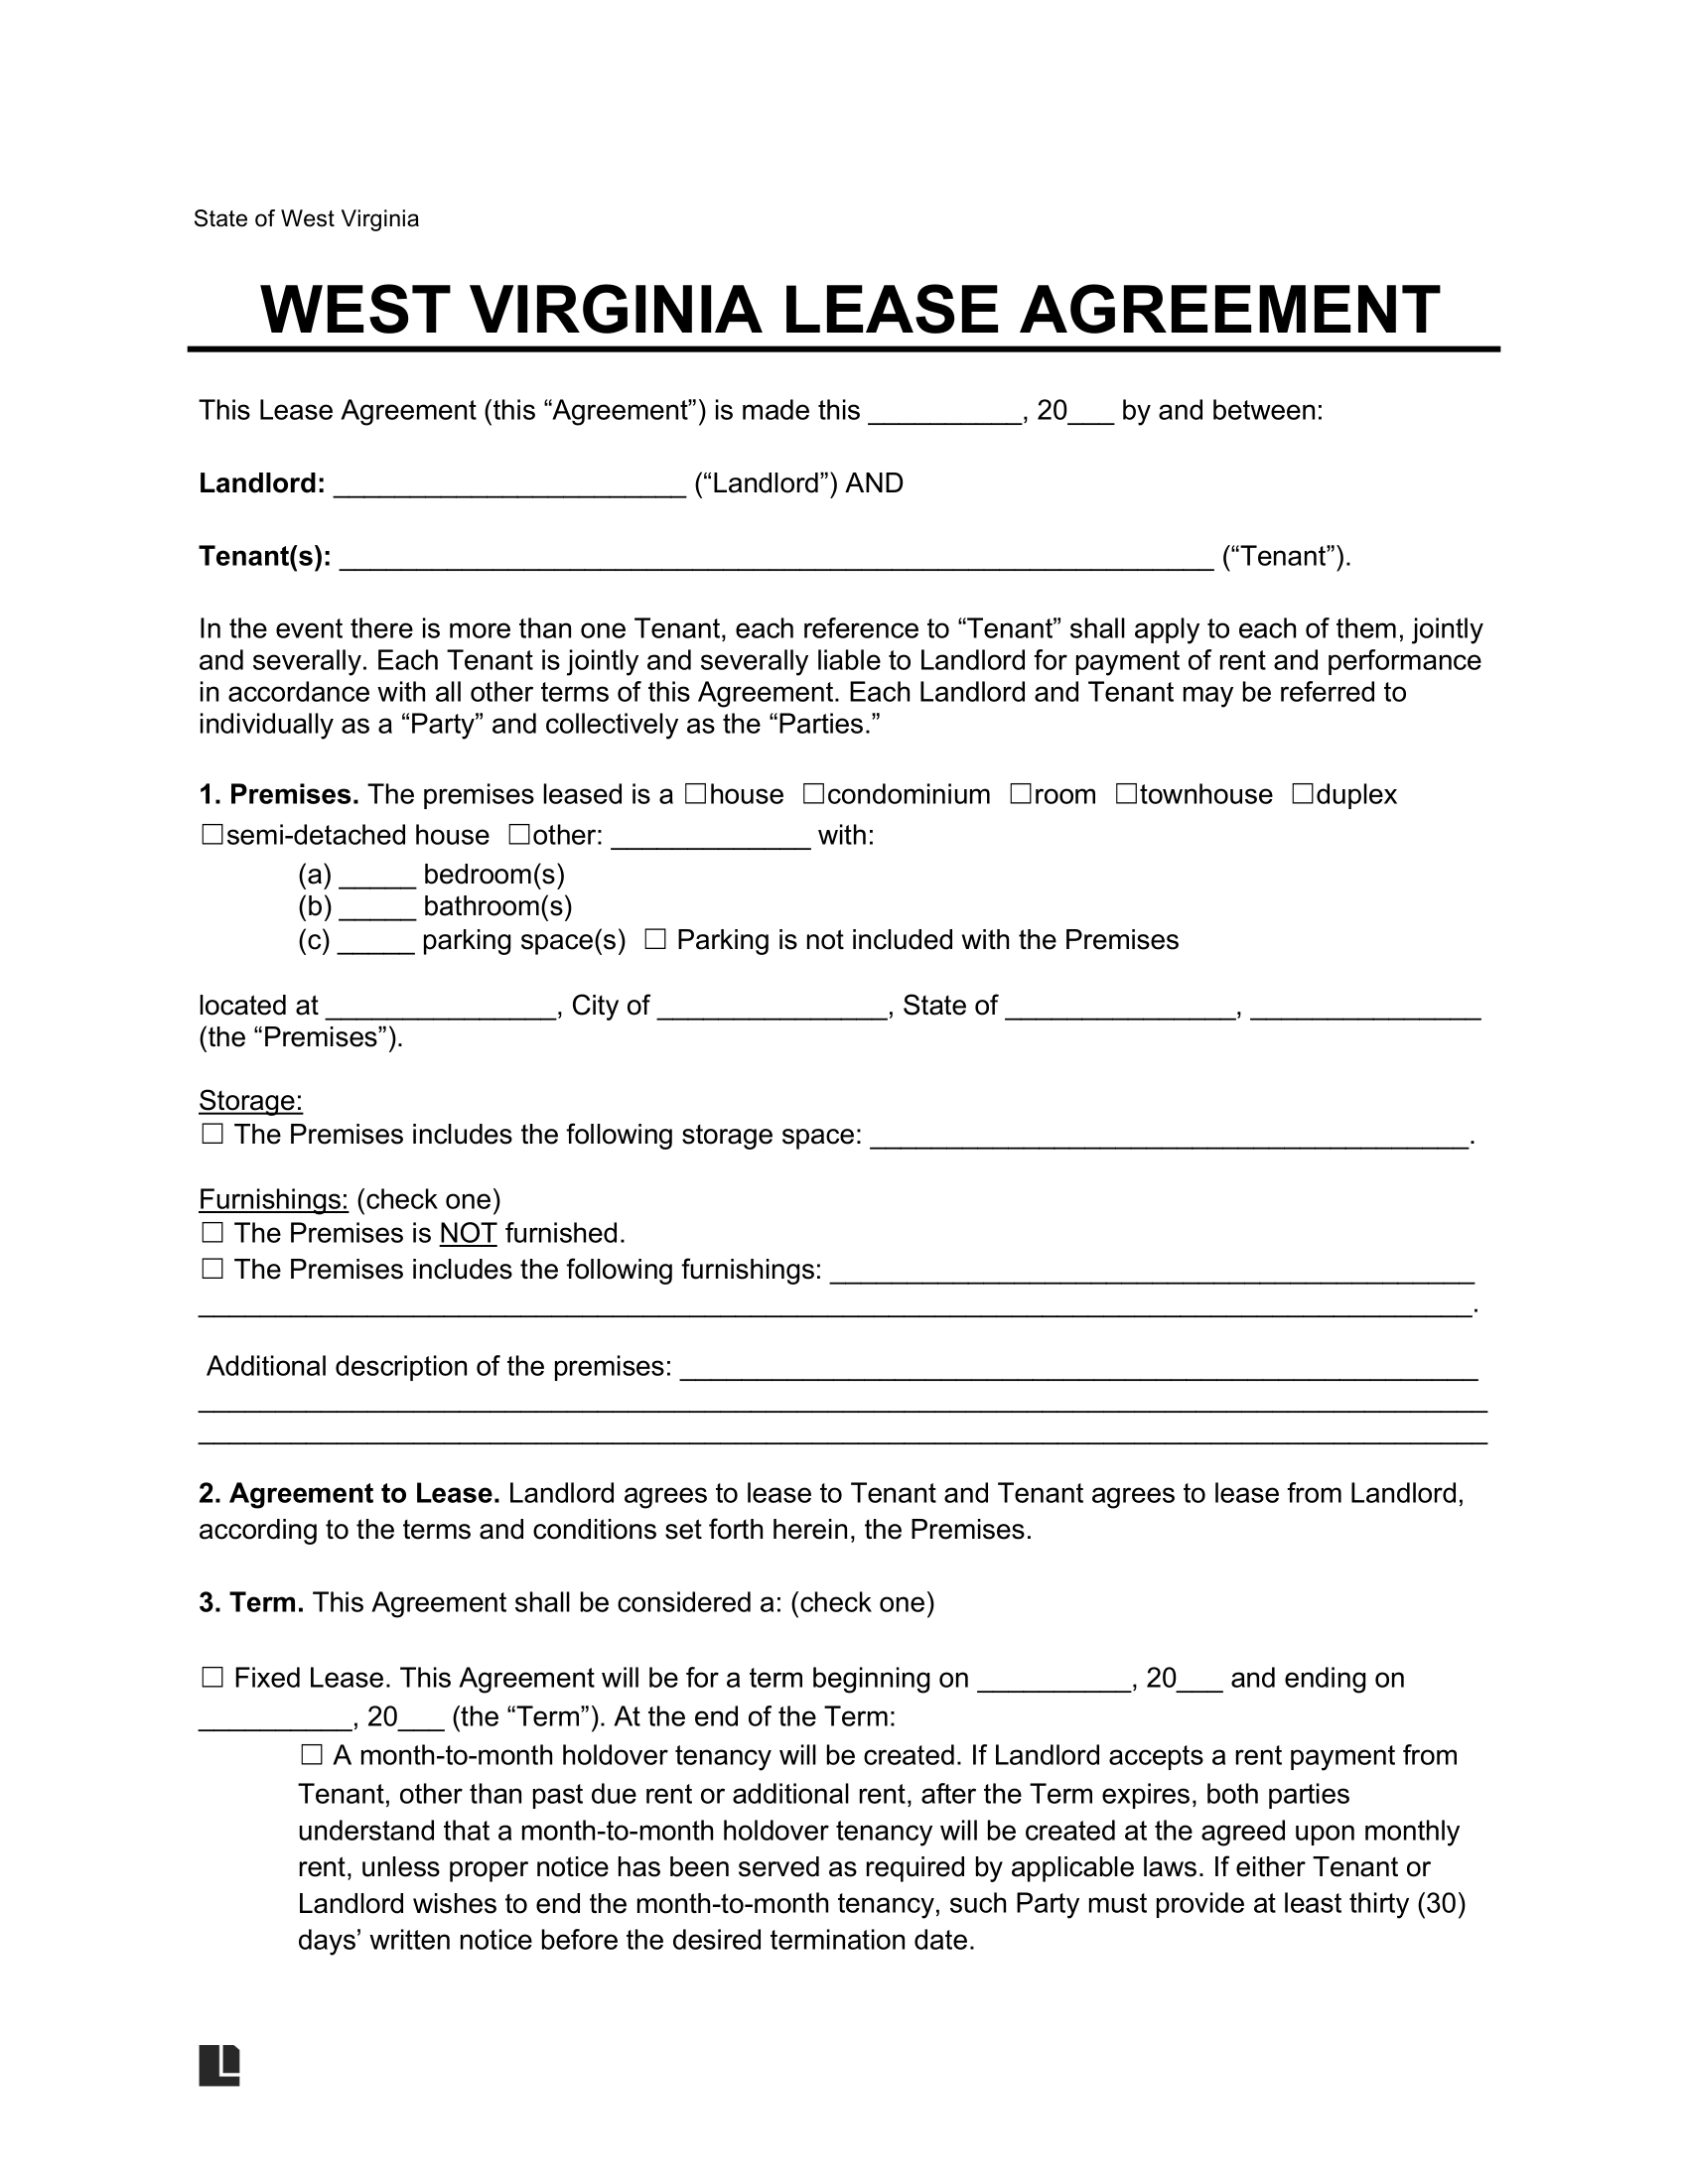 West Virginia Residential Lease Agreement